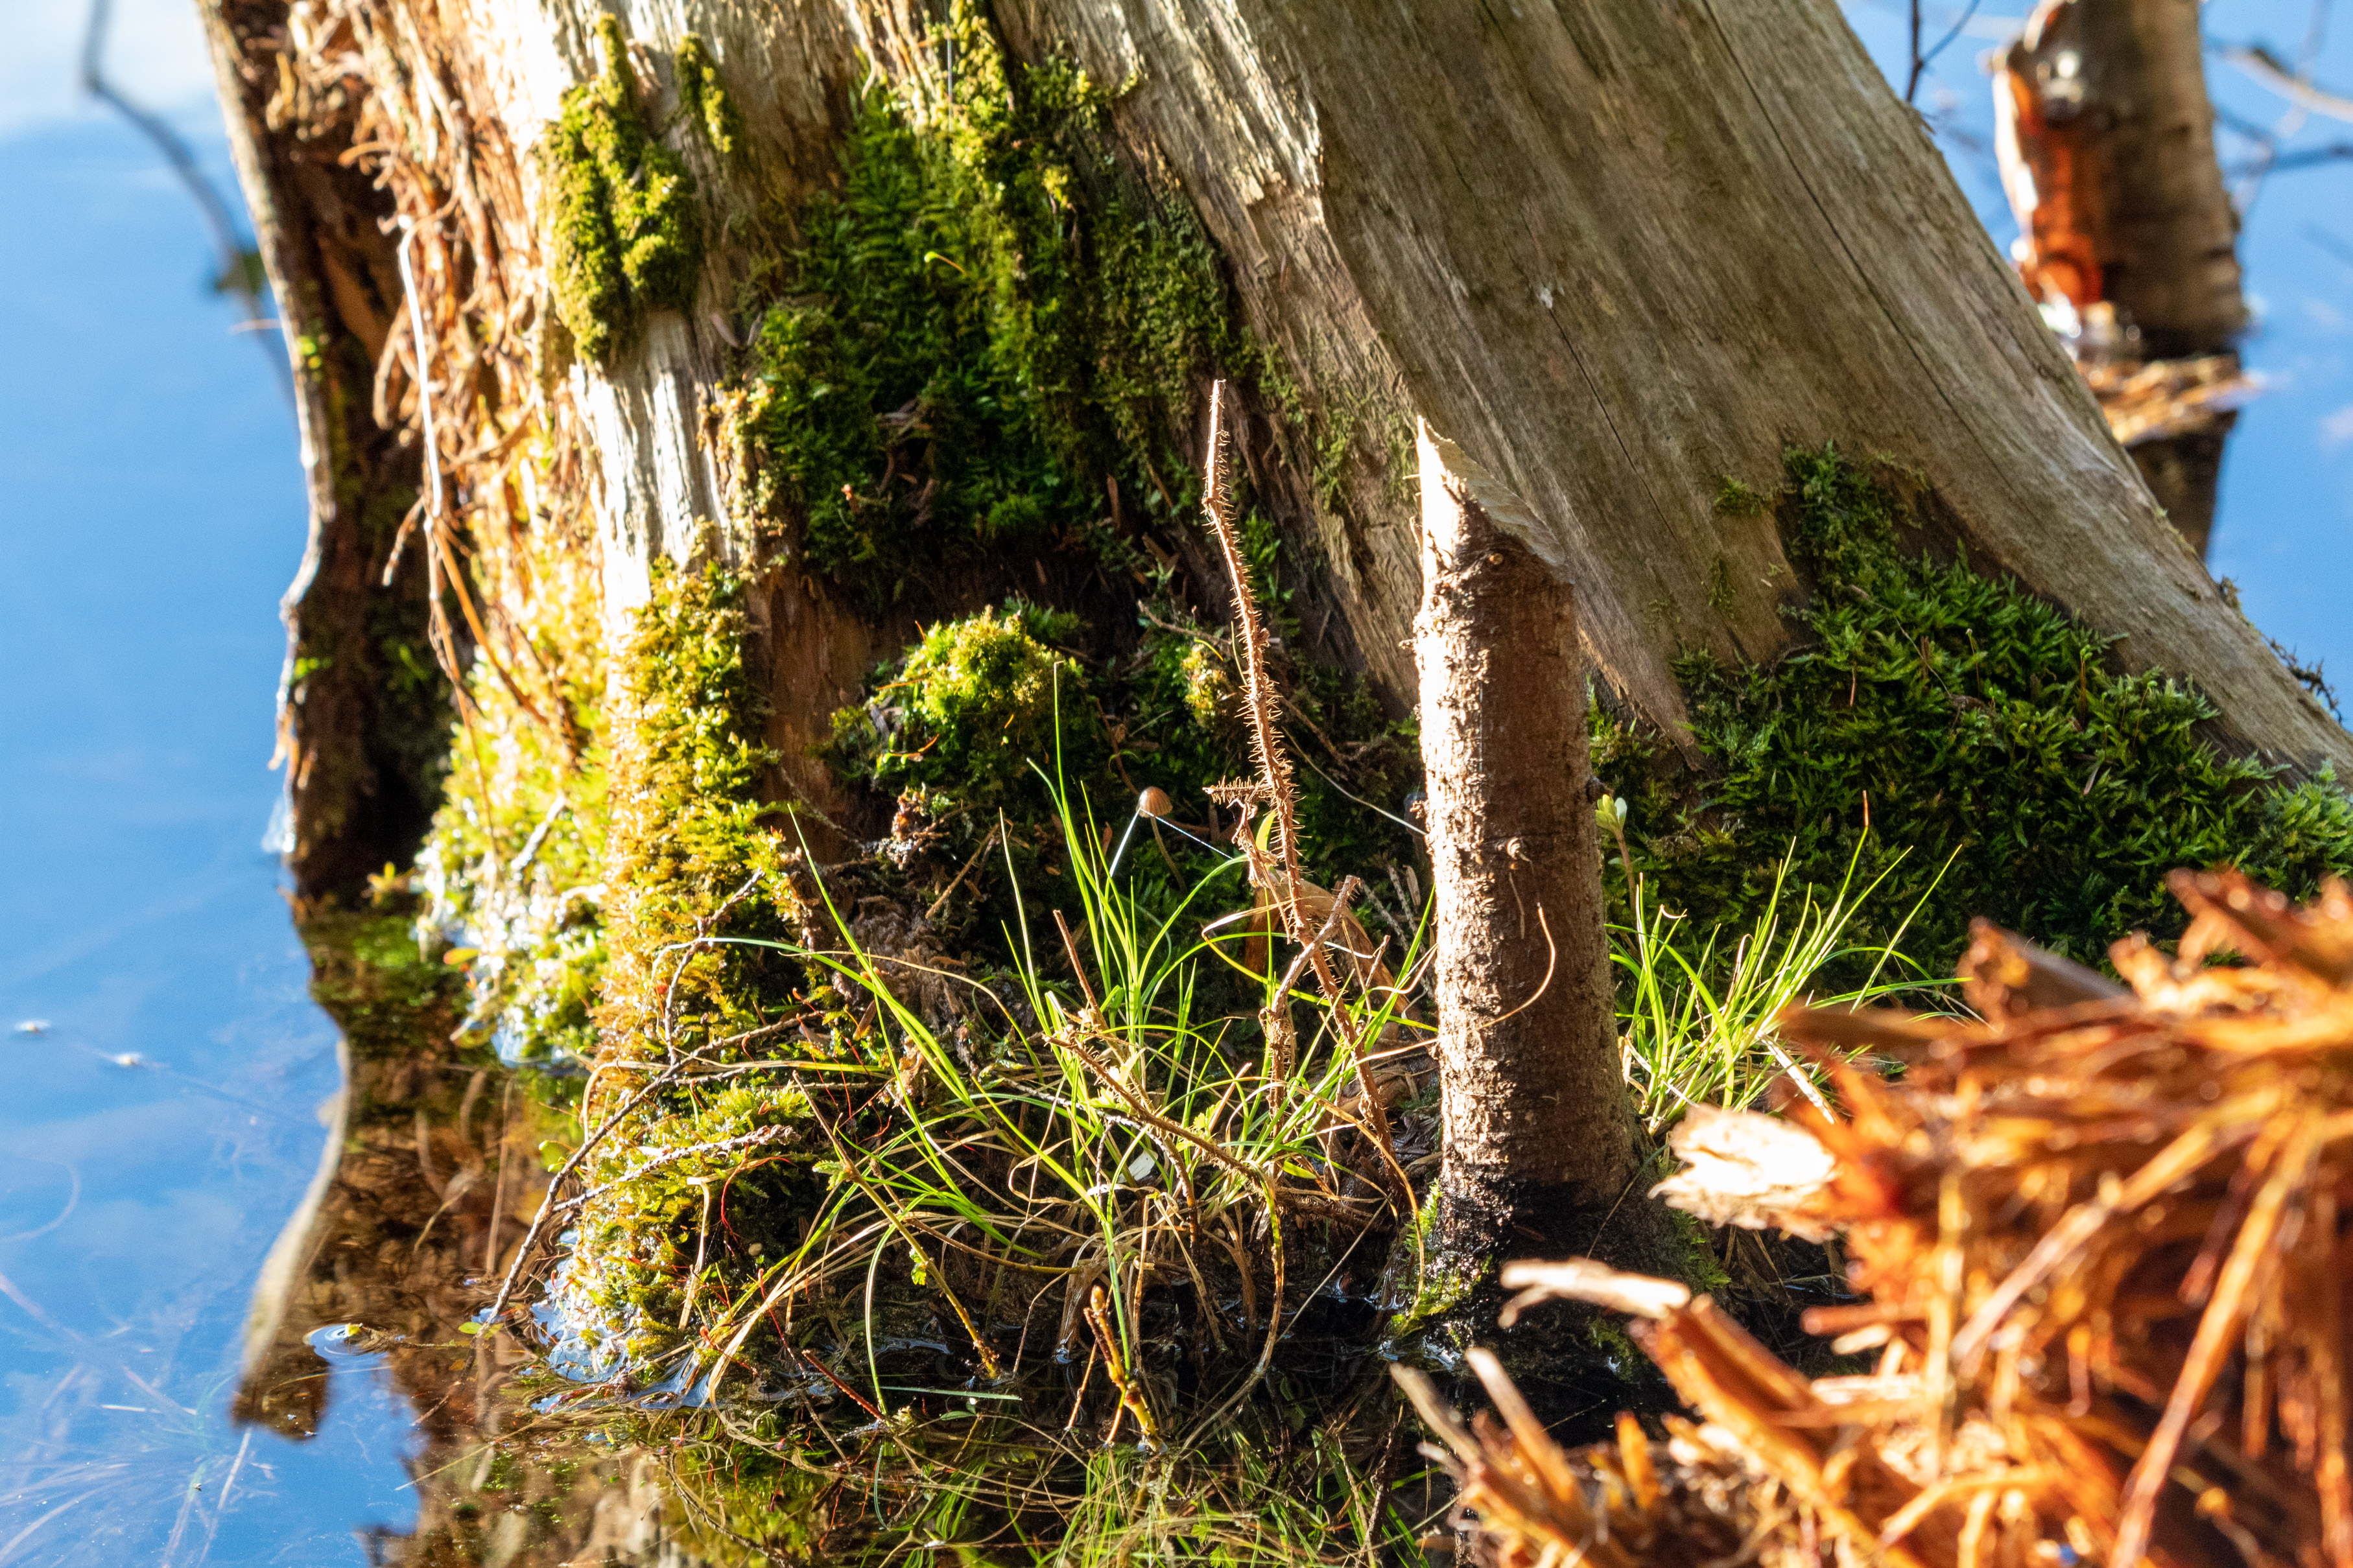 Tiny mushroom hidden in a tuft of grass on a tree log surrounded by water